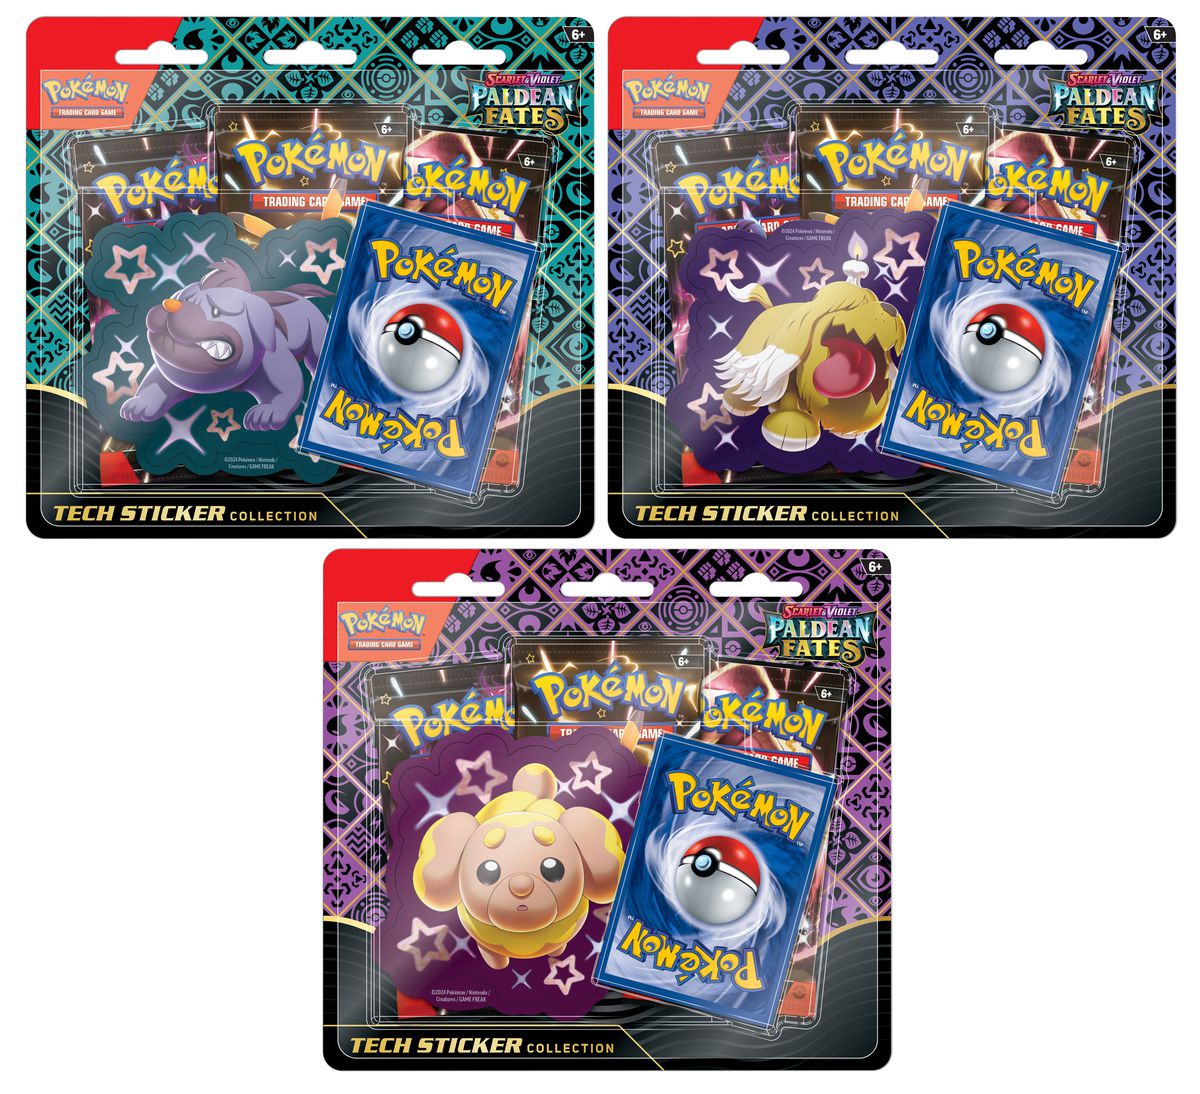 Three Pokémon TCG blister packs with Paldean Fates packs and large stickers inside.